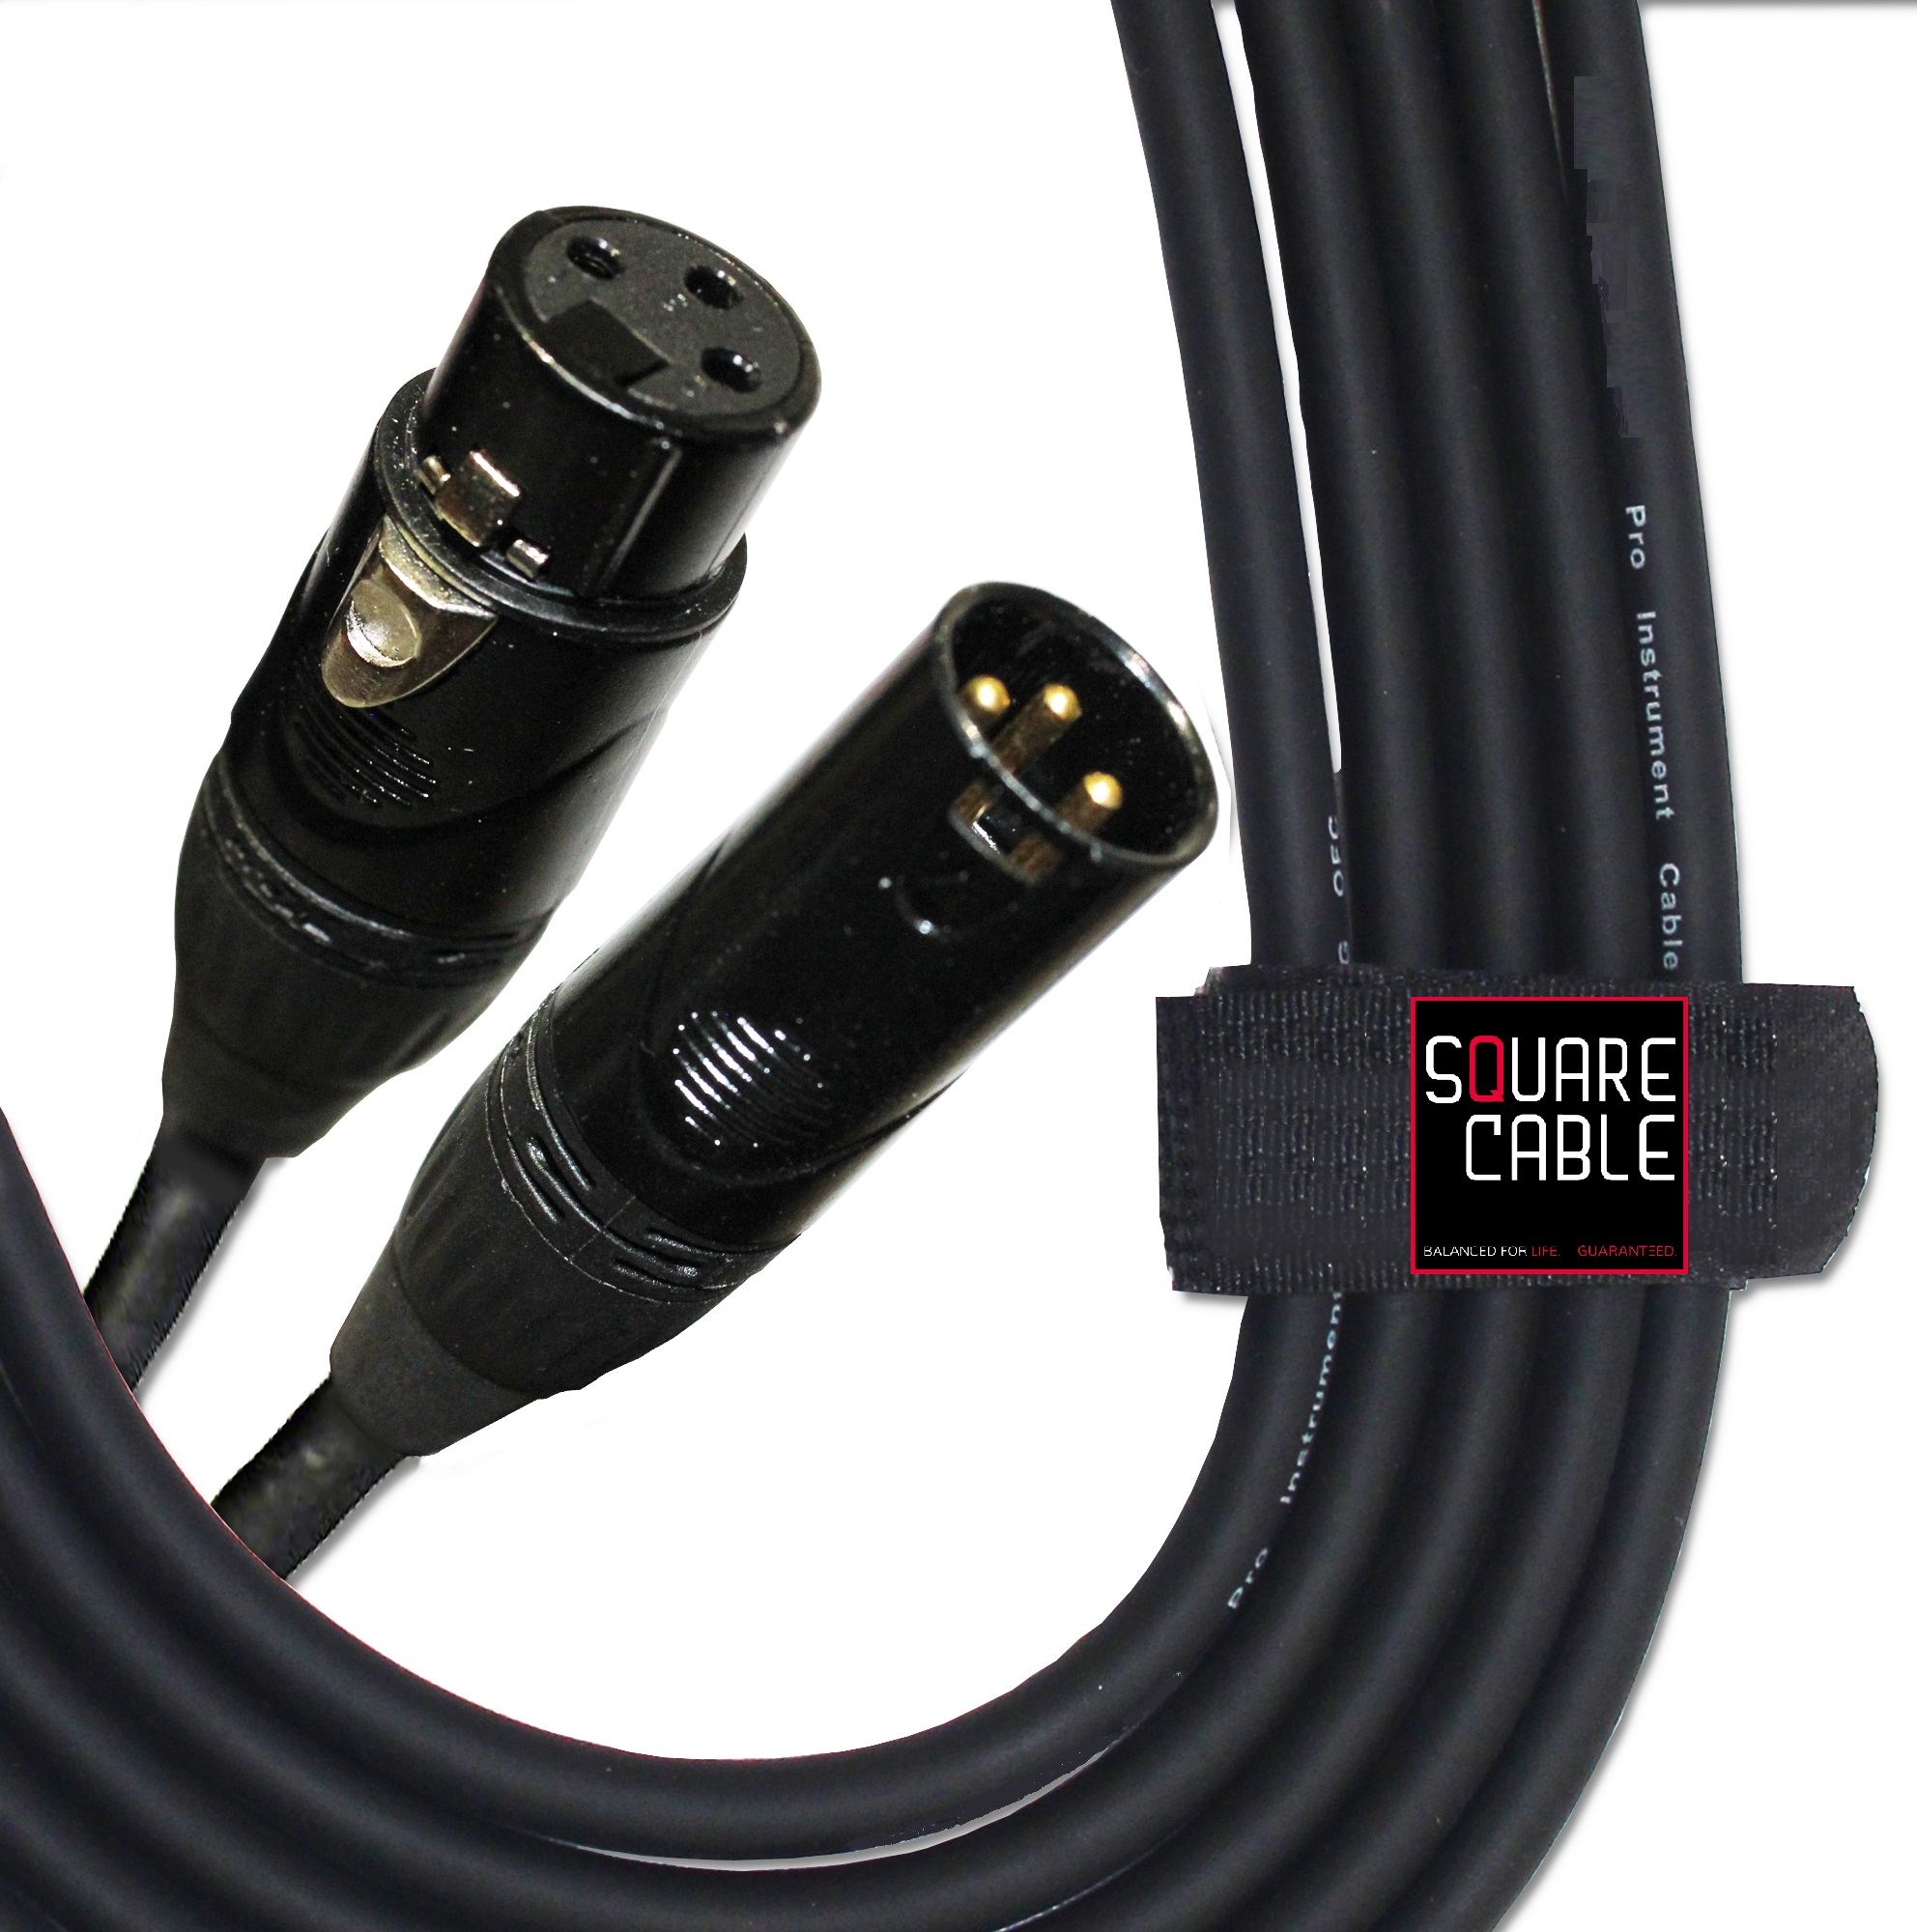 square-cable-dmx-10--10ft-dmx-cable-3-pin.jpg